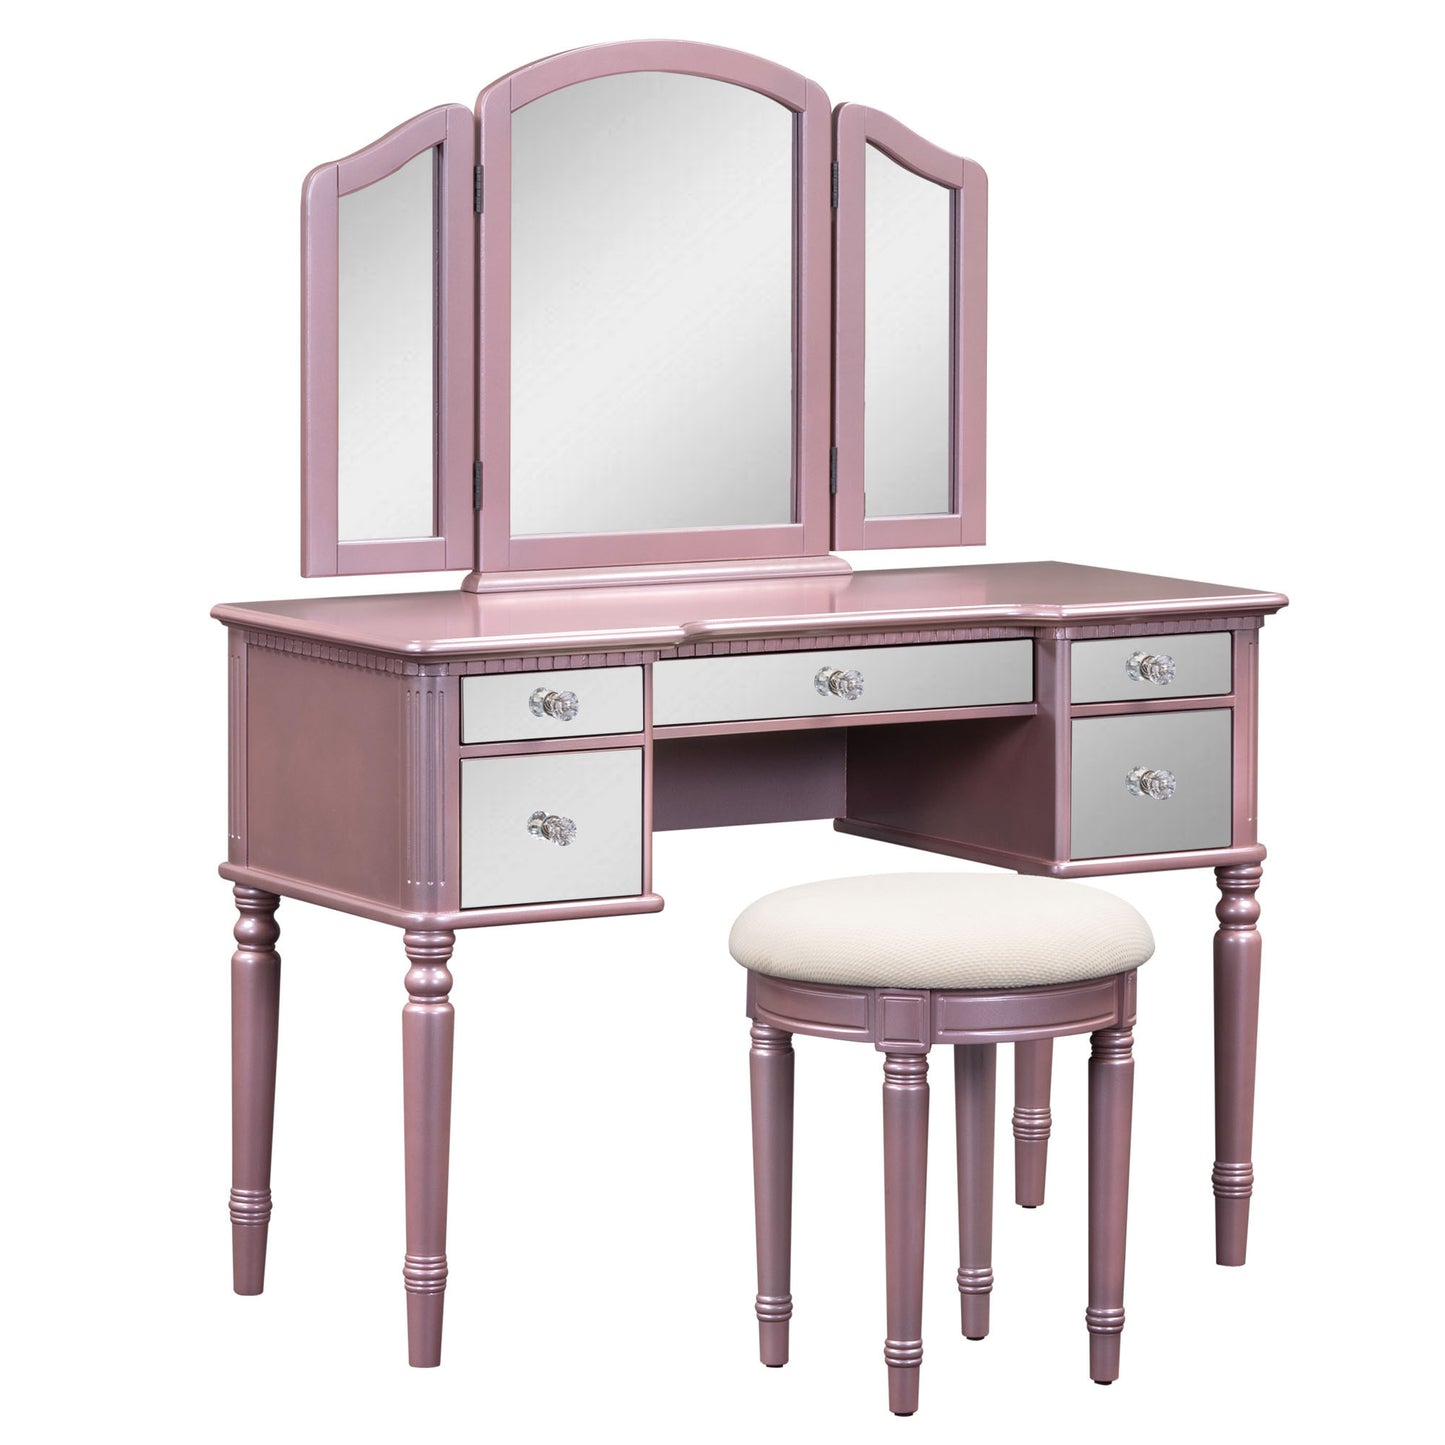 GO 43" Dressing Table Set with Mirrored Drawers and Stool, Tri-fold Mirror, Makeup Vanity Set for Bedroom, Rose Gold